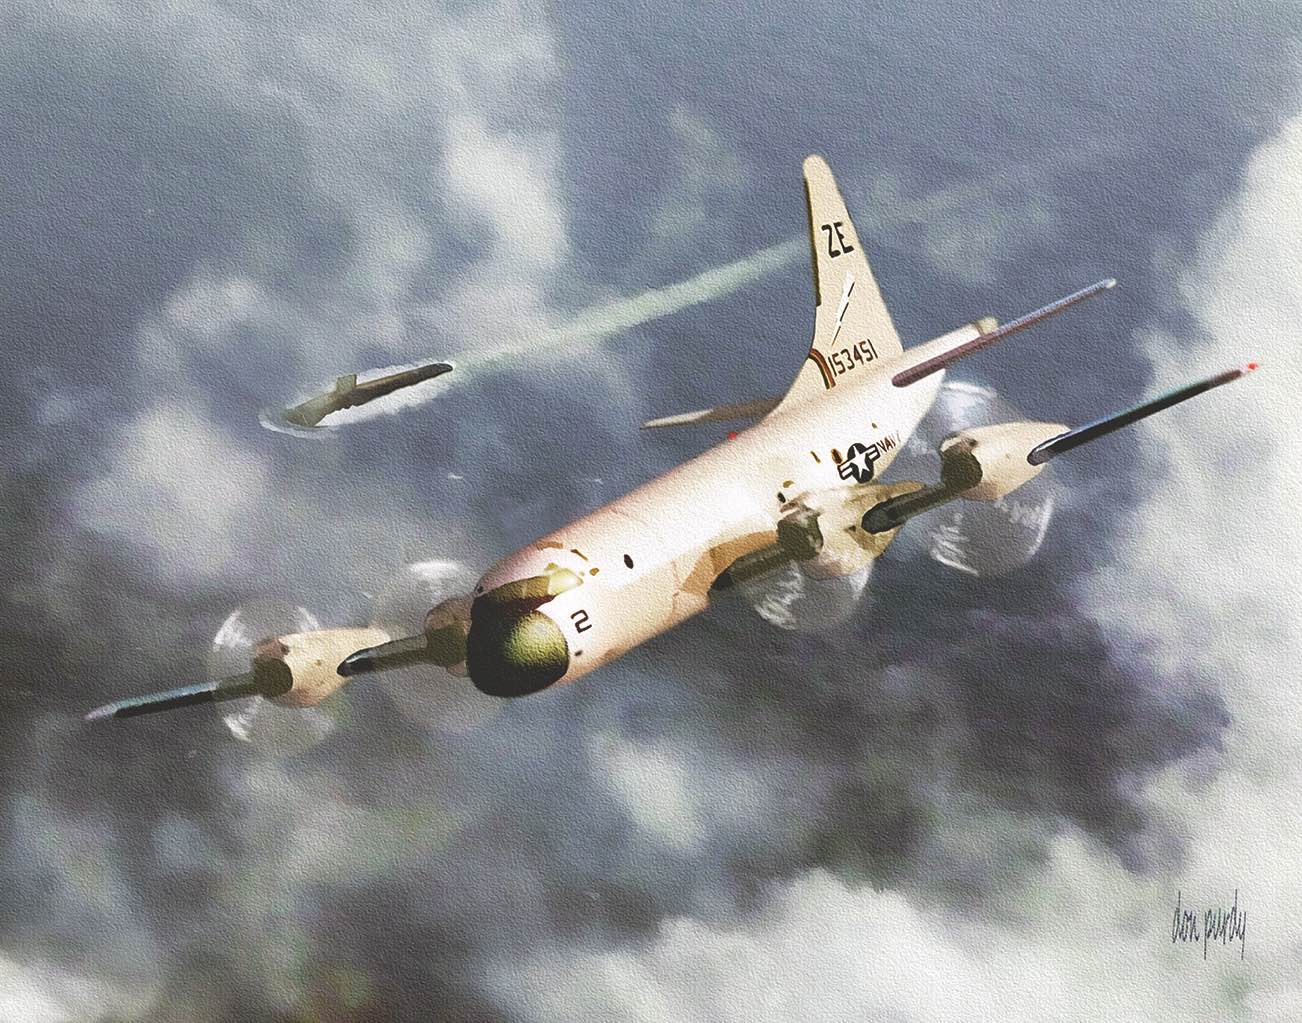 A P-3 Orion “sub chaser” aircraft flies above a submarine in a painting by Purdy titled “Gotcha!” / Courtesy Don Purdy